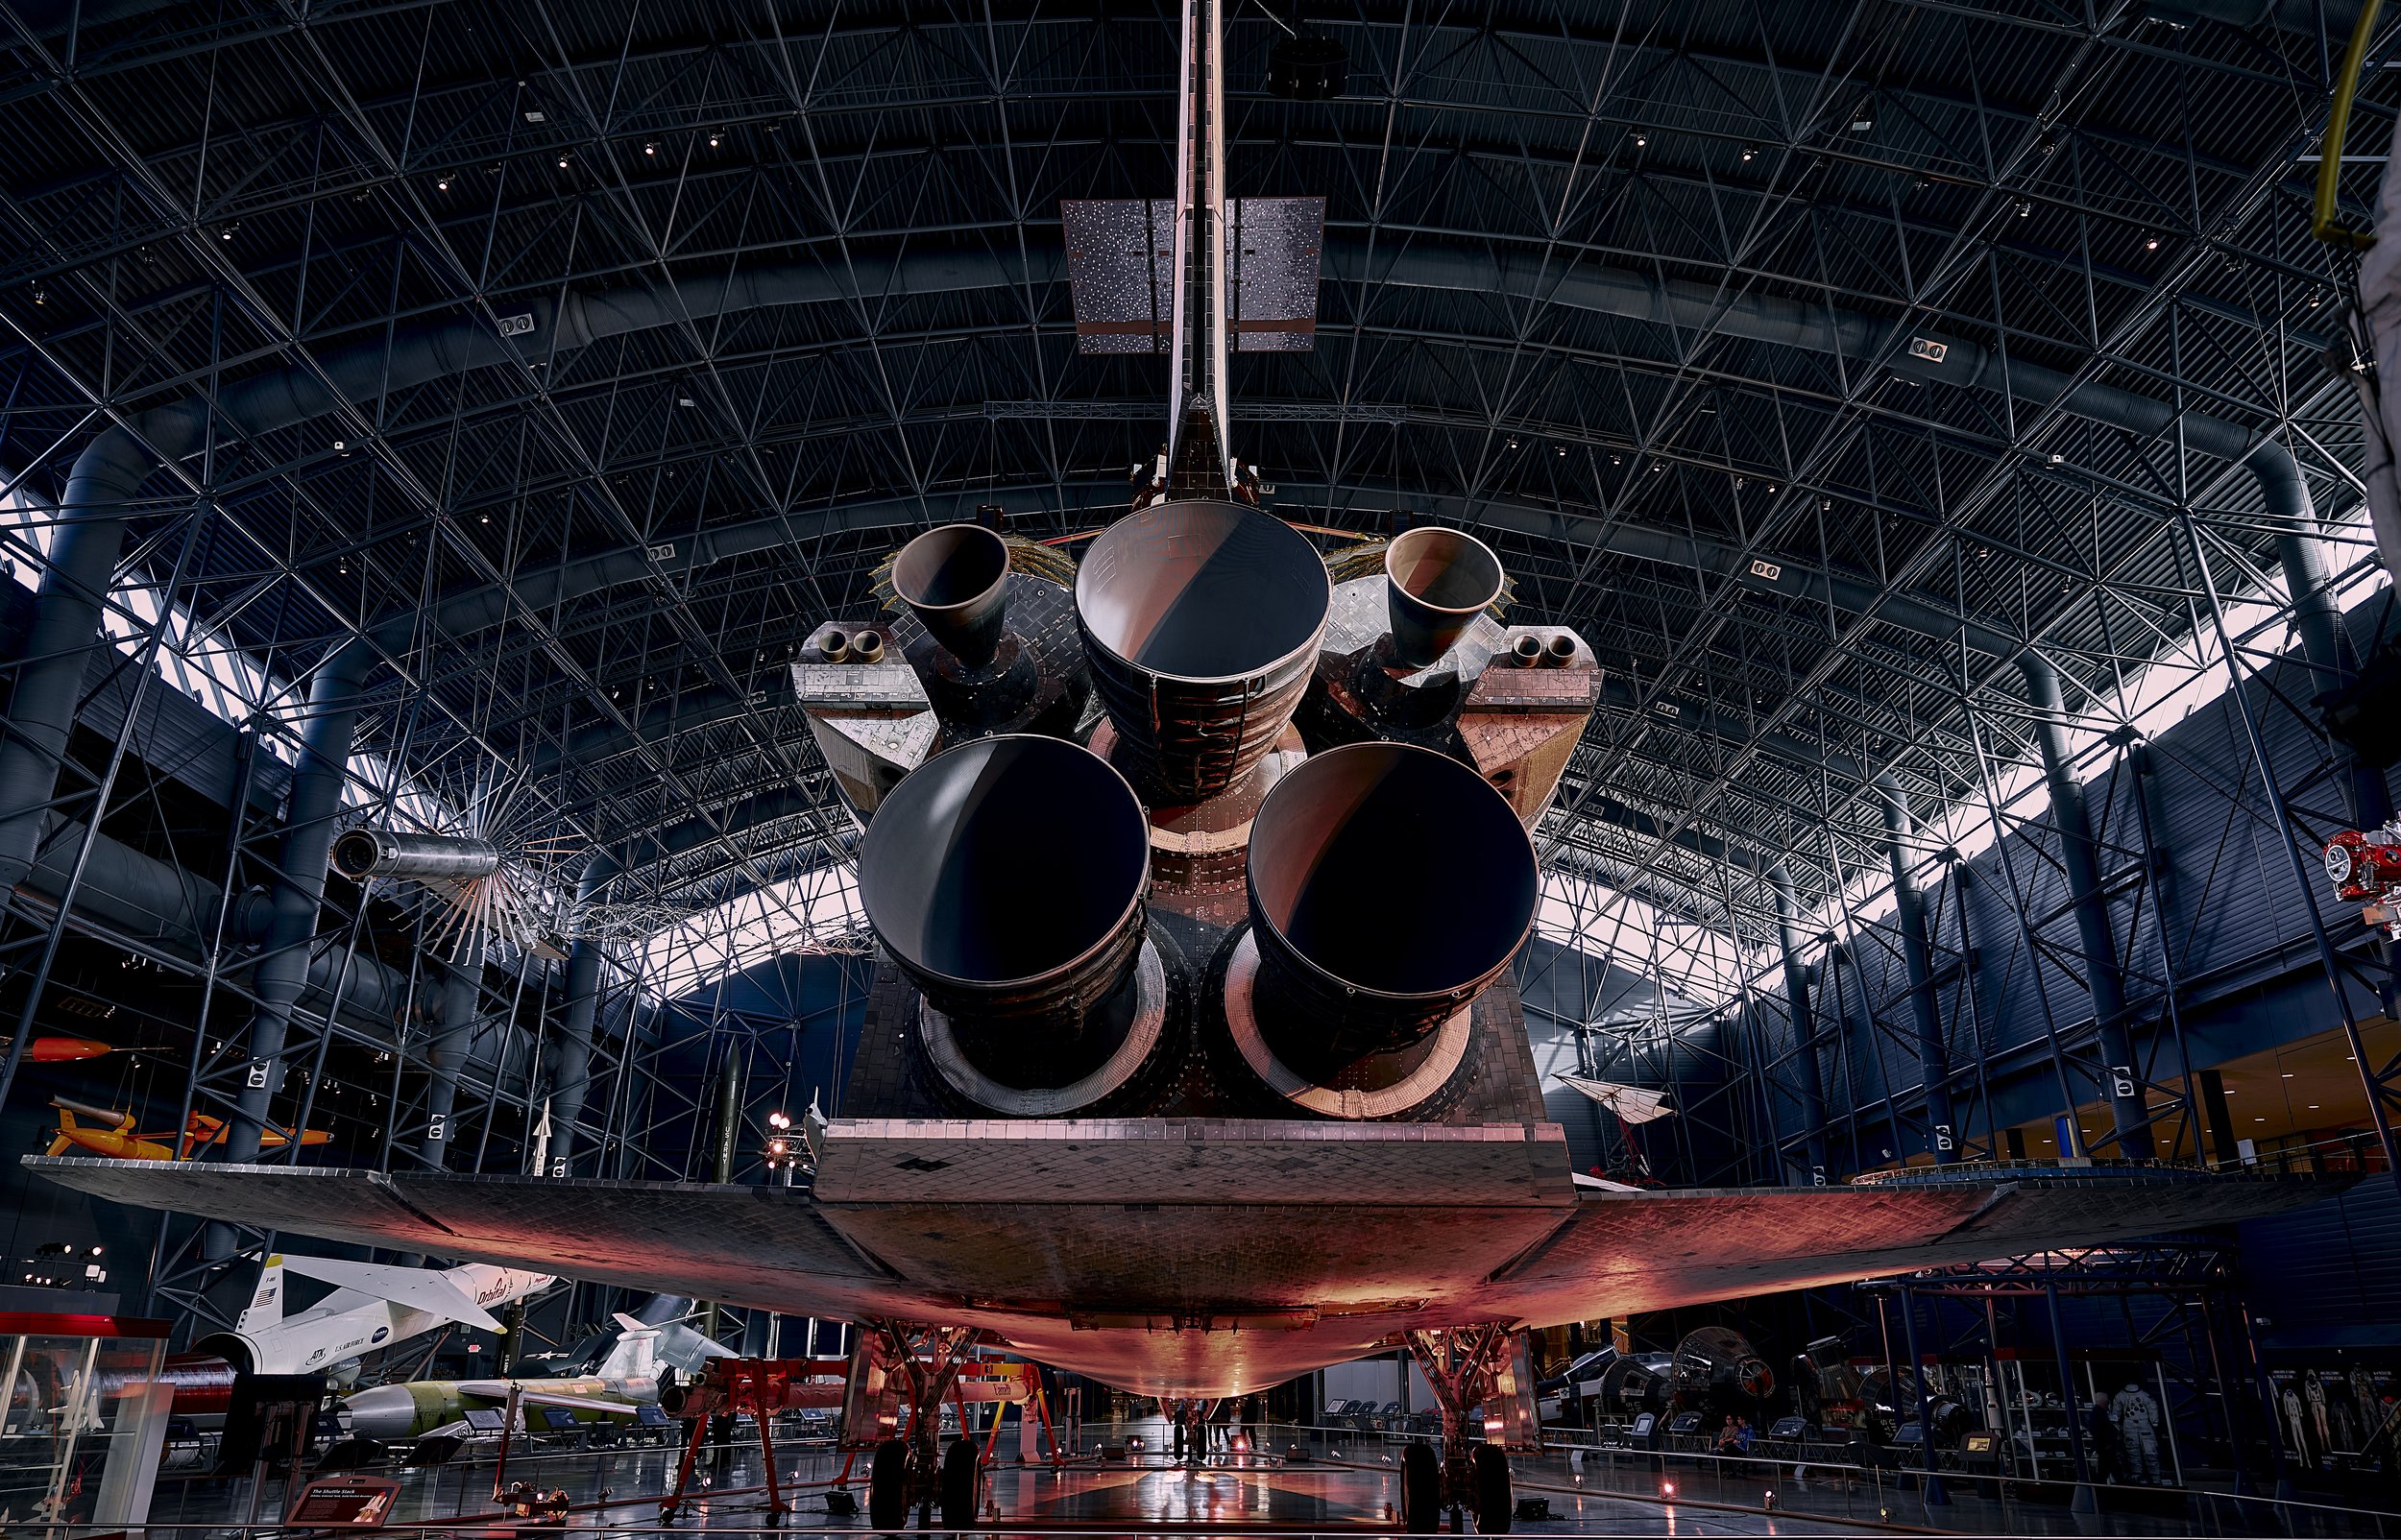 Engines of the Space Shuttle Discovery by Greg Frucci